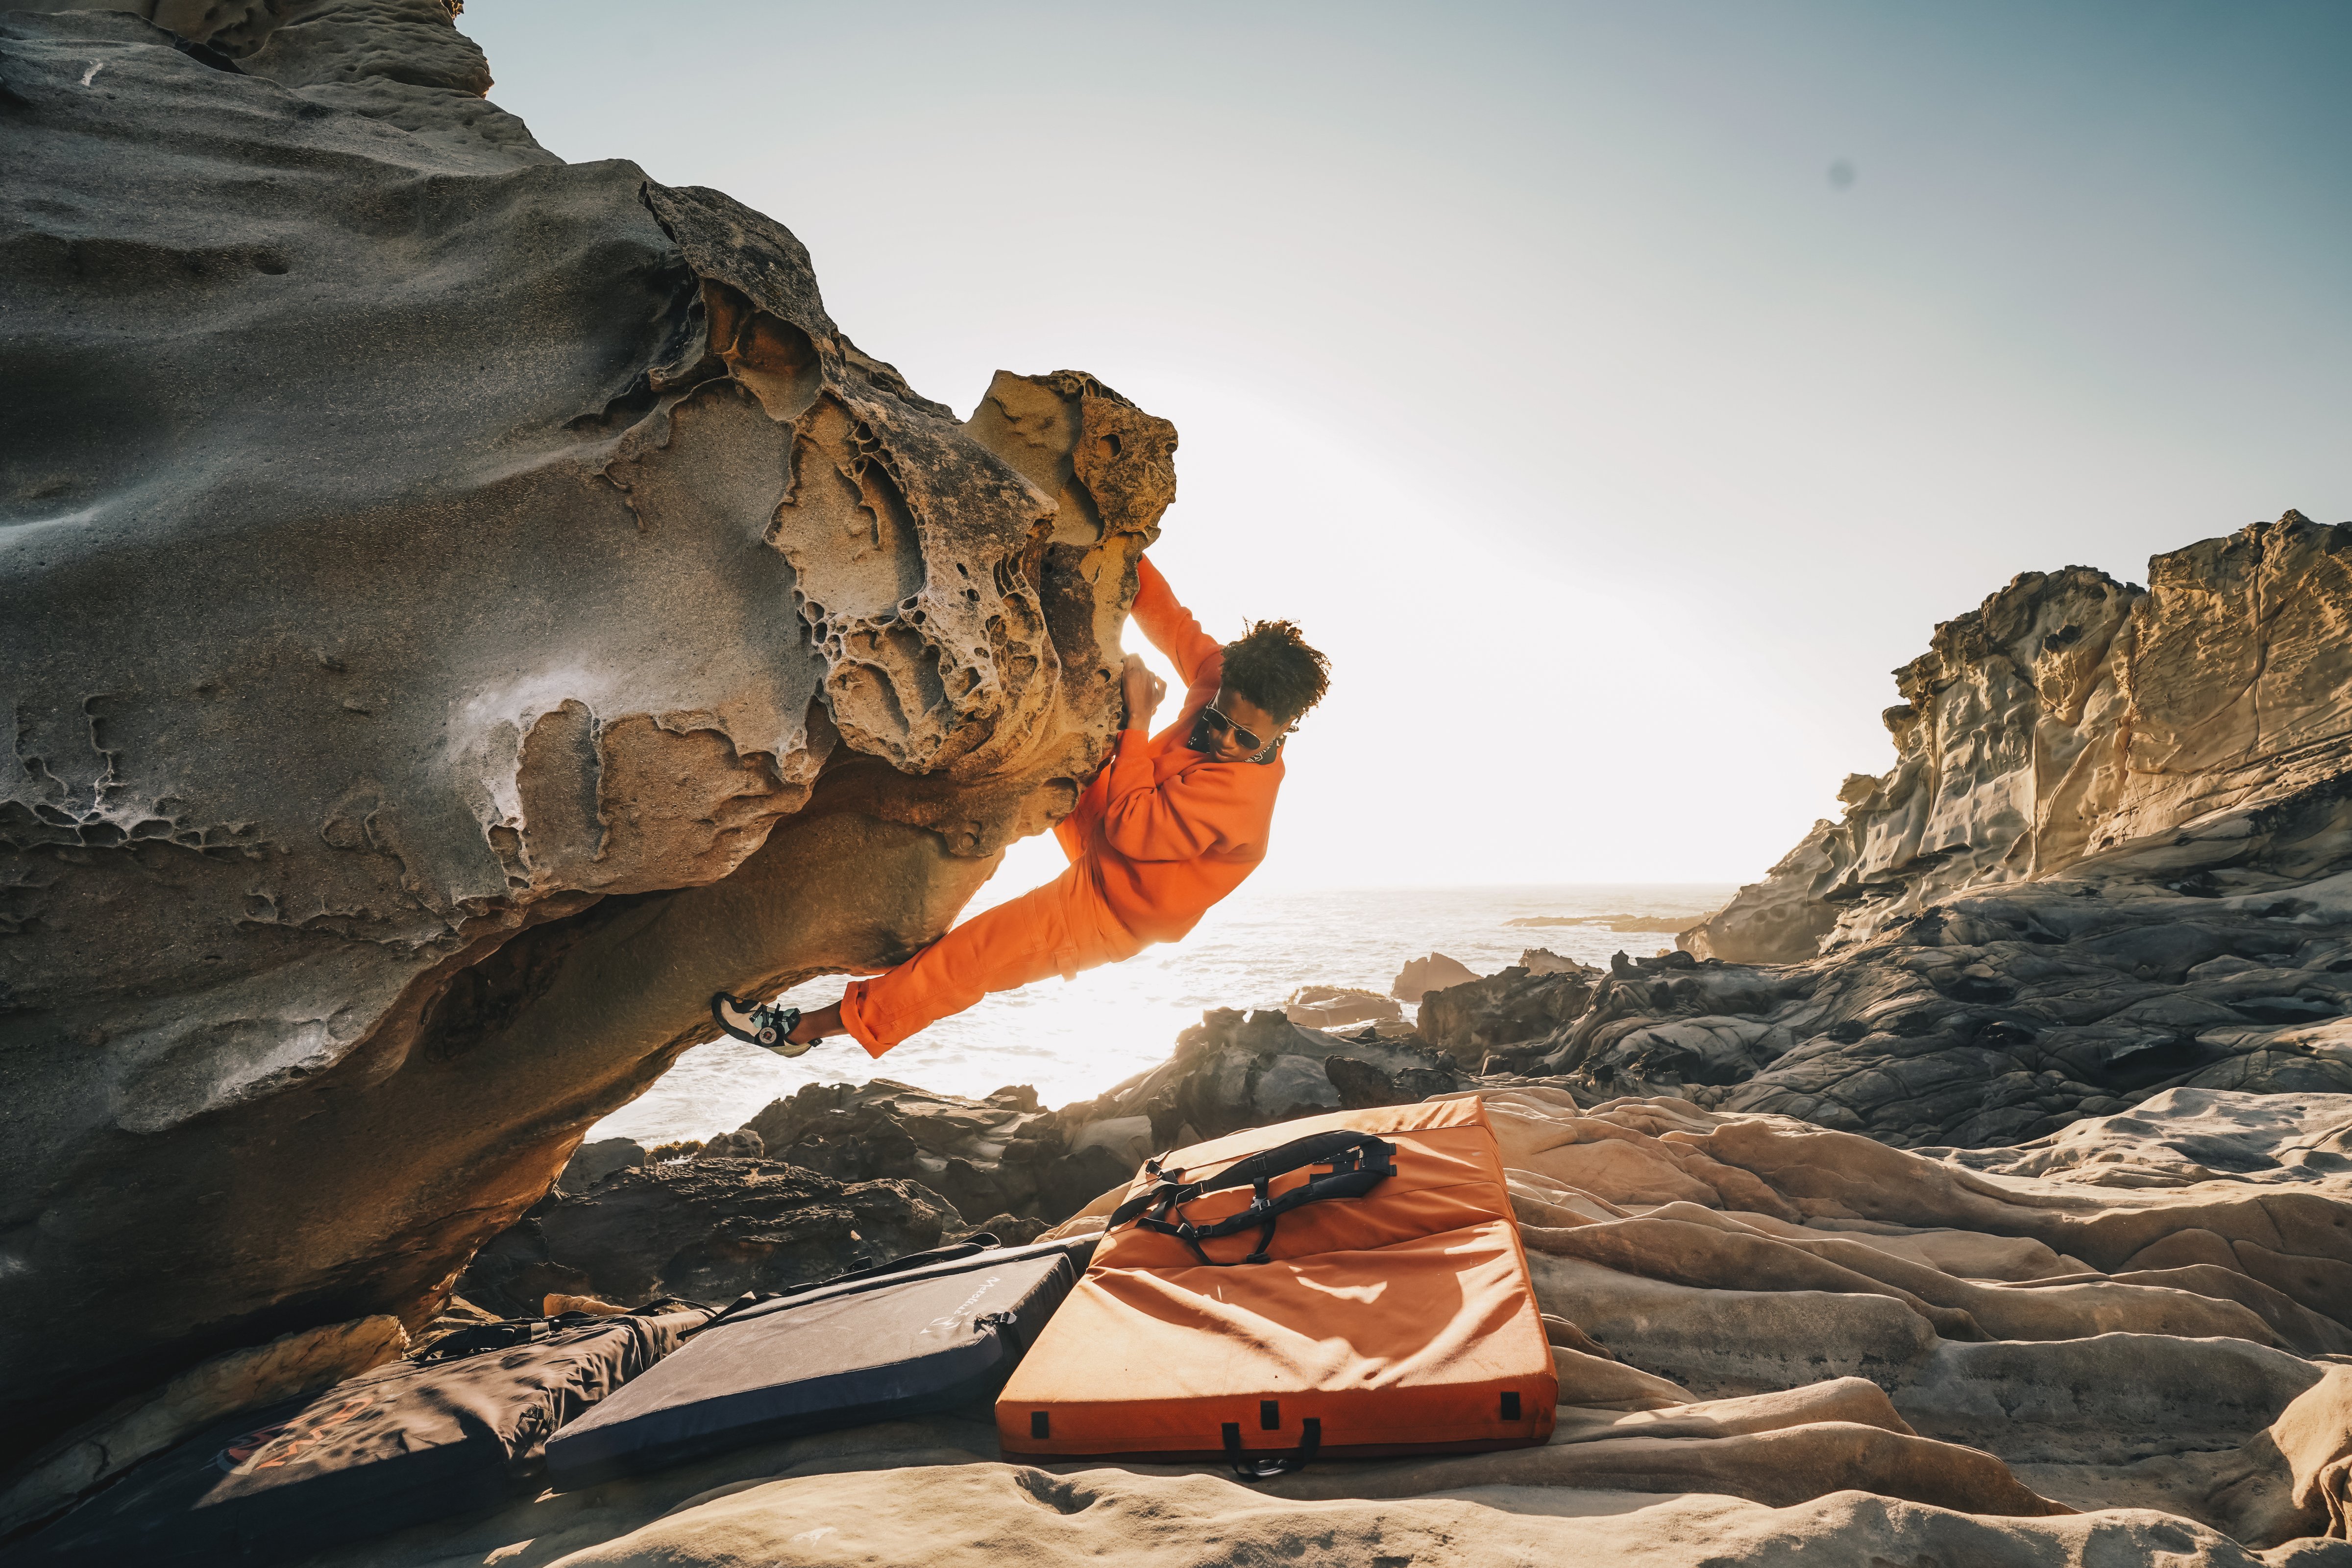 L. Renee Blount, who started rock climbing in college, is pictured bouldering on the Sonoma Coast in Northern California in Sept. 2022. (L. Renee Blount)